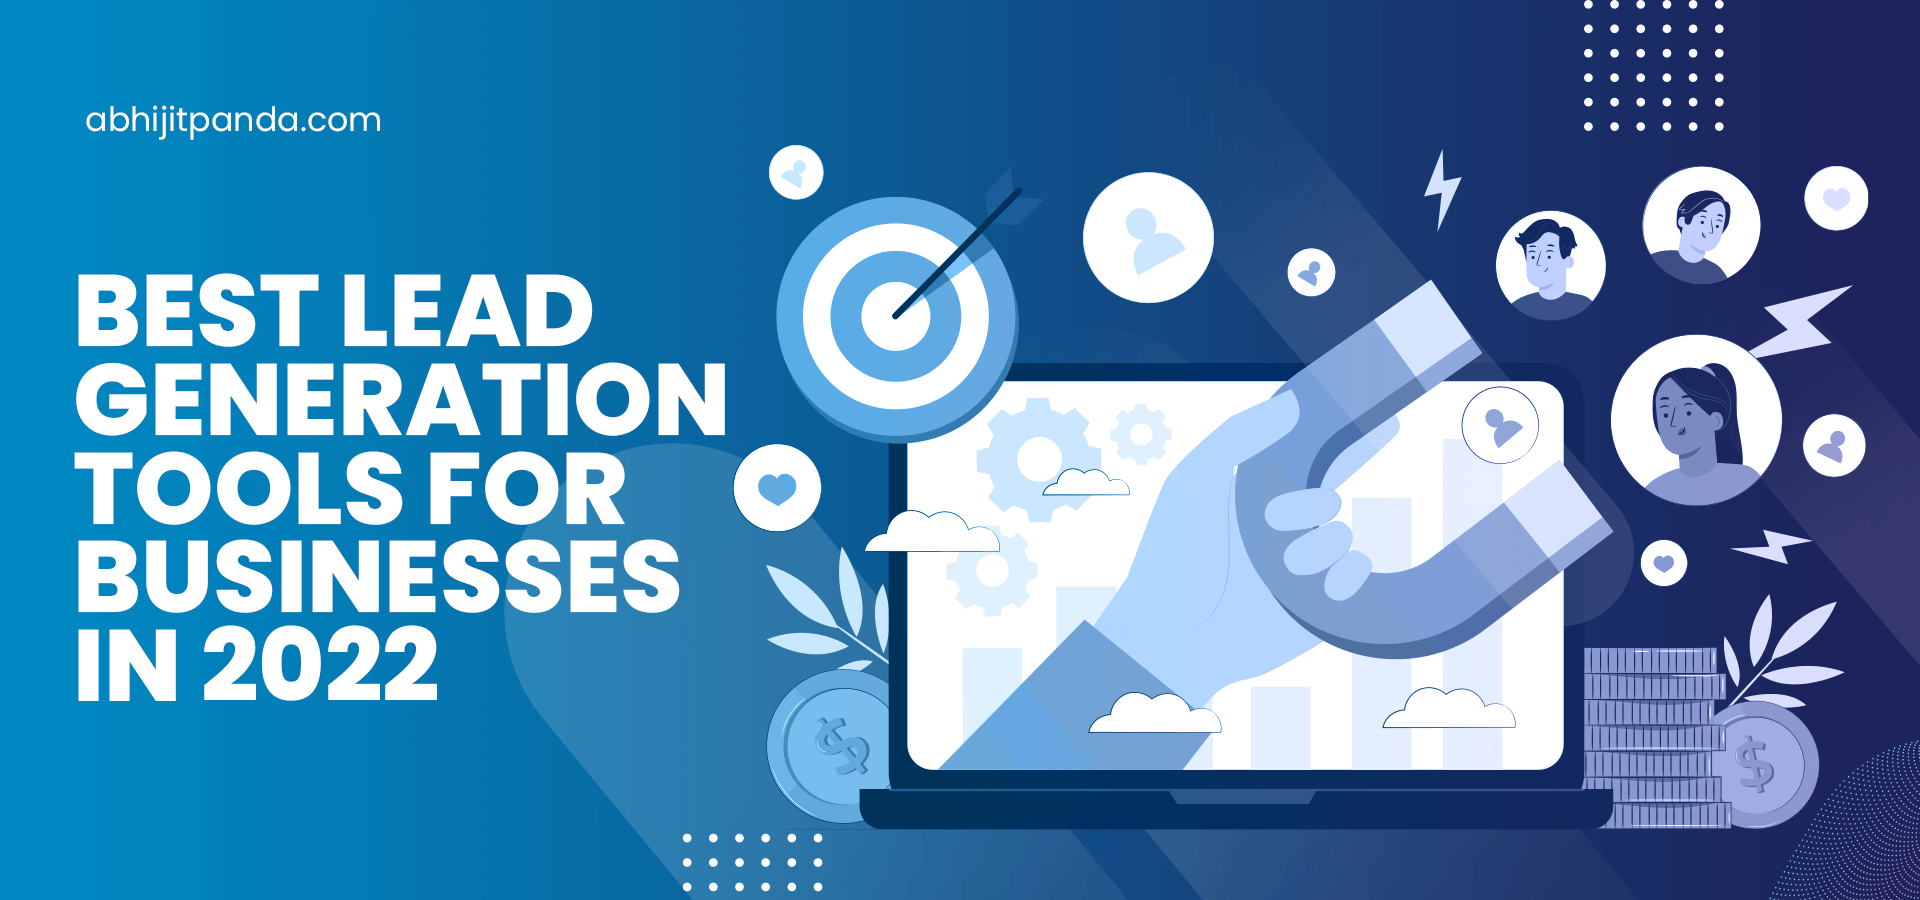 Best Lead Generation Tools for Businesses in 2022